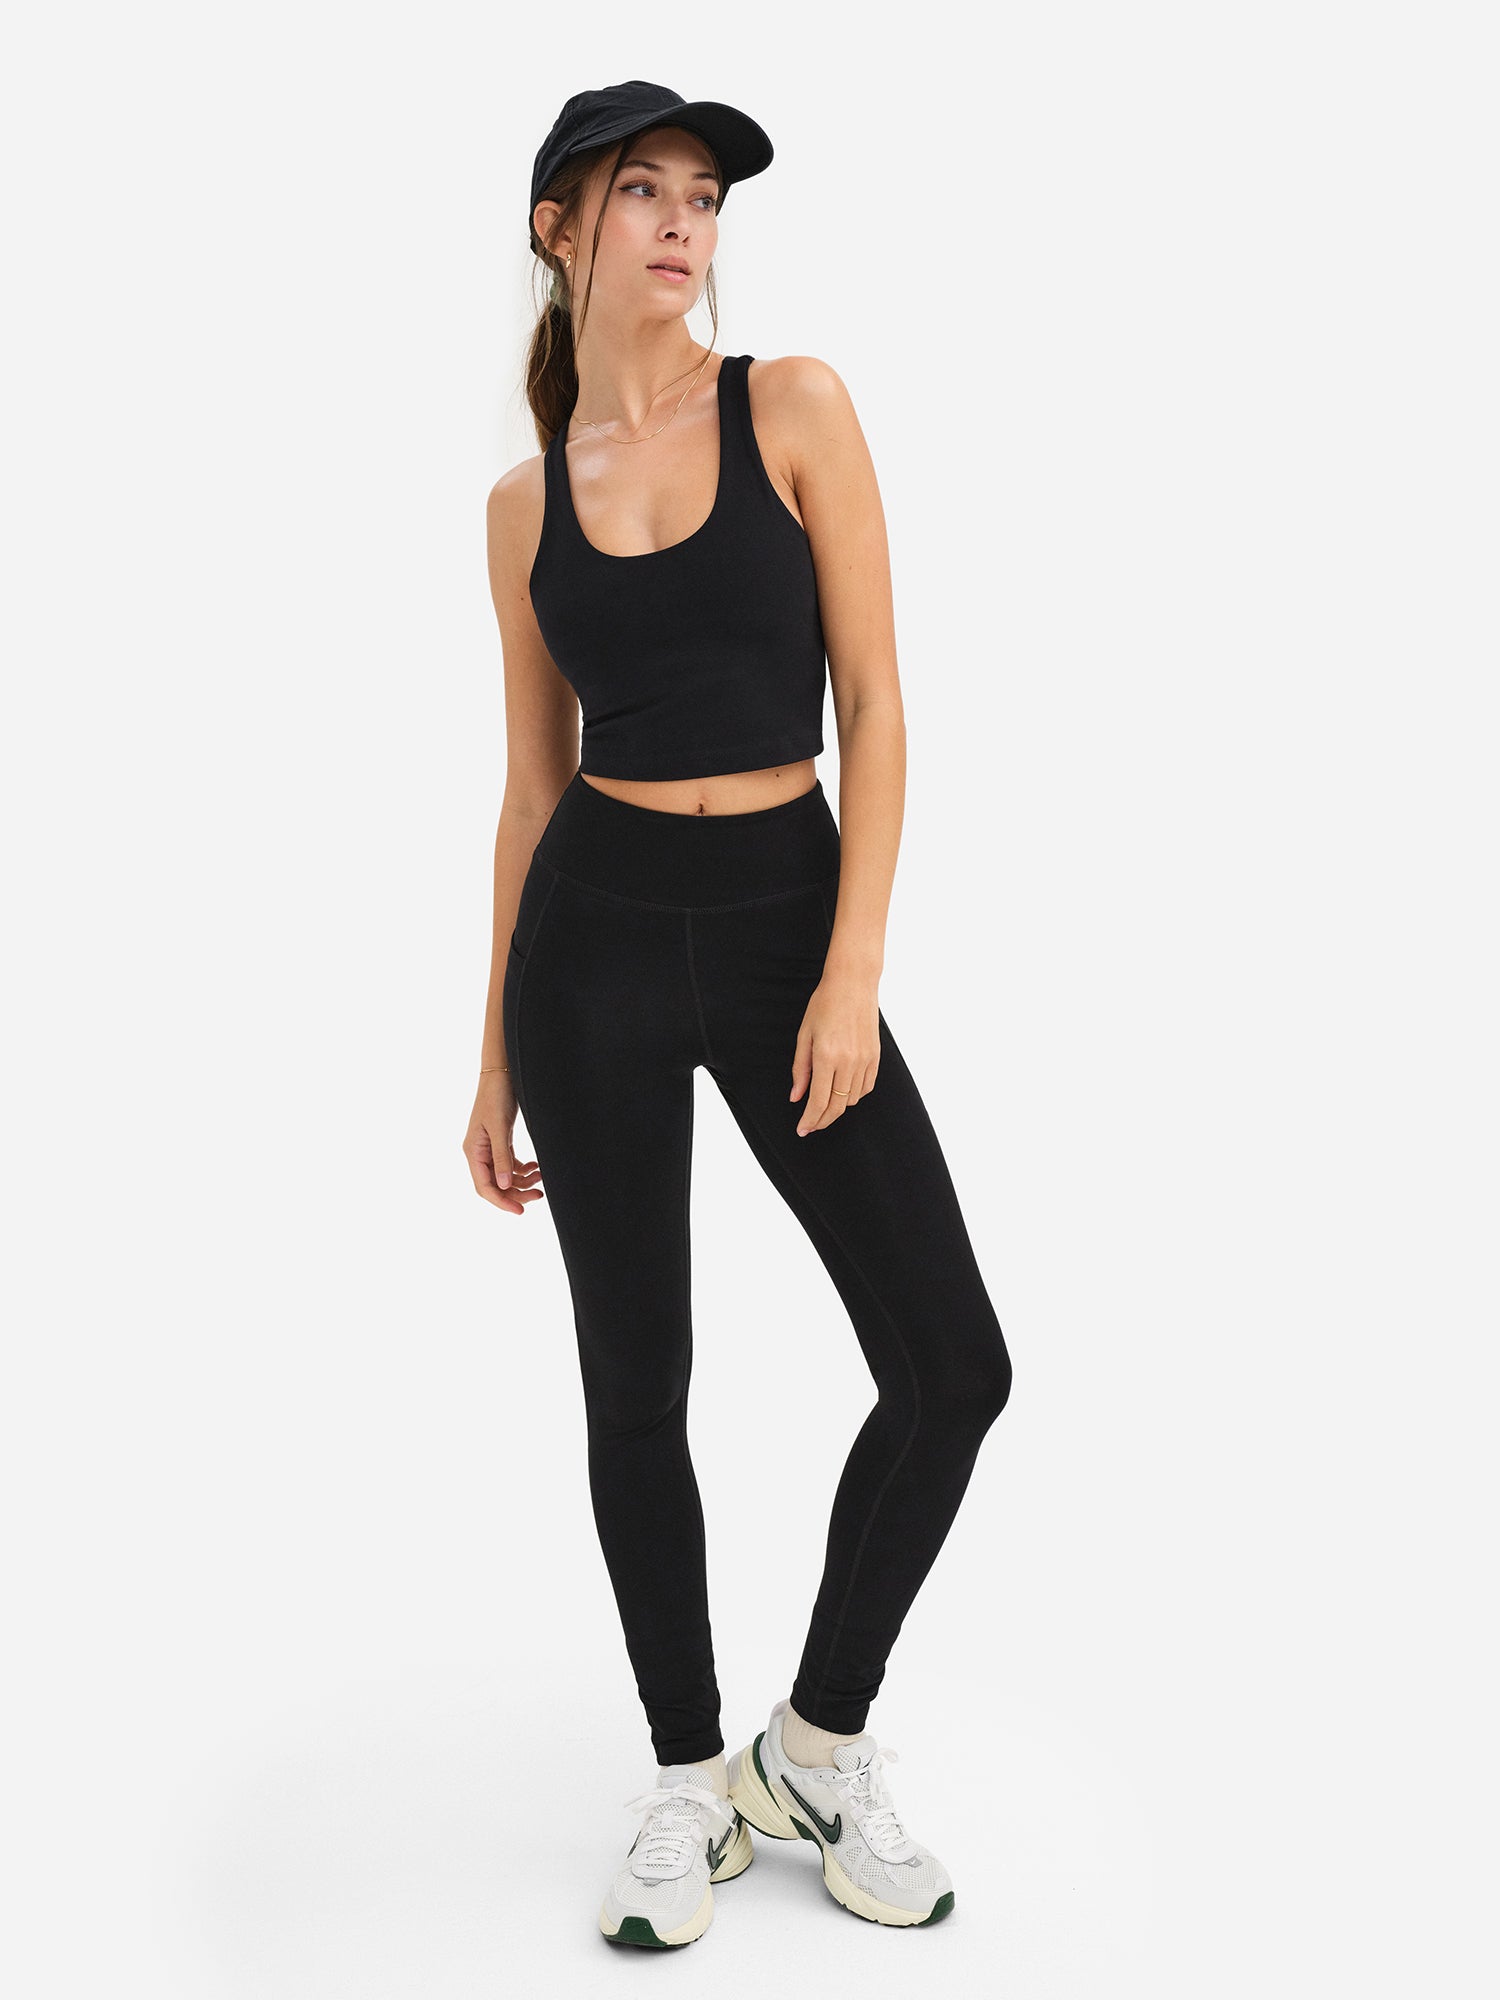 Women's Sculpt Legging made with Organic Cotton, Pact